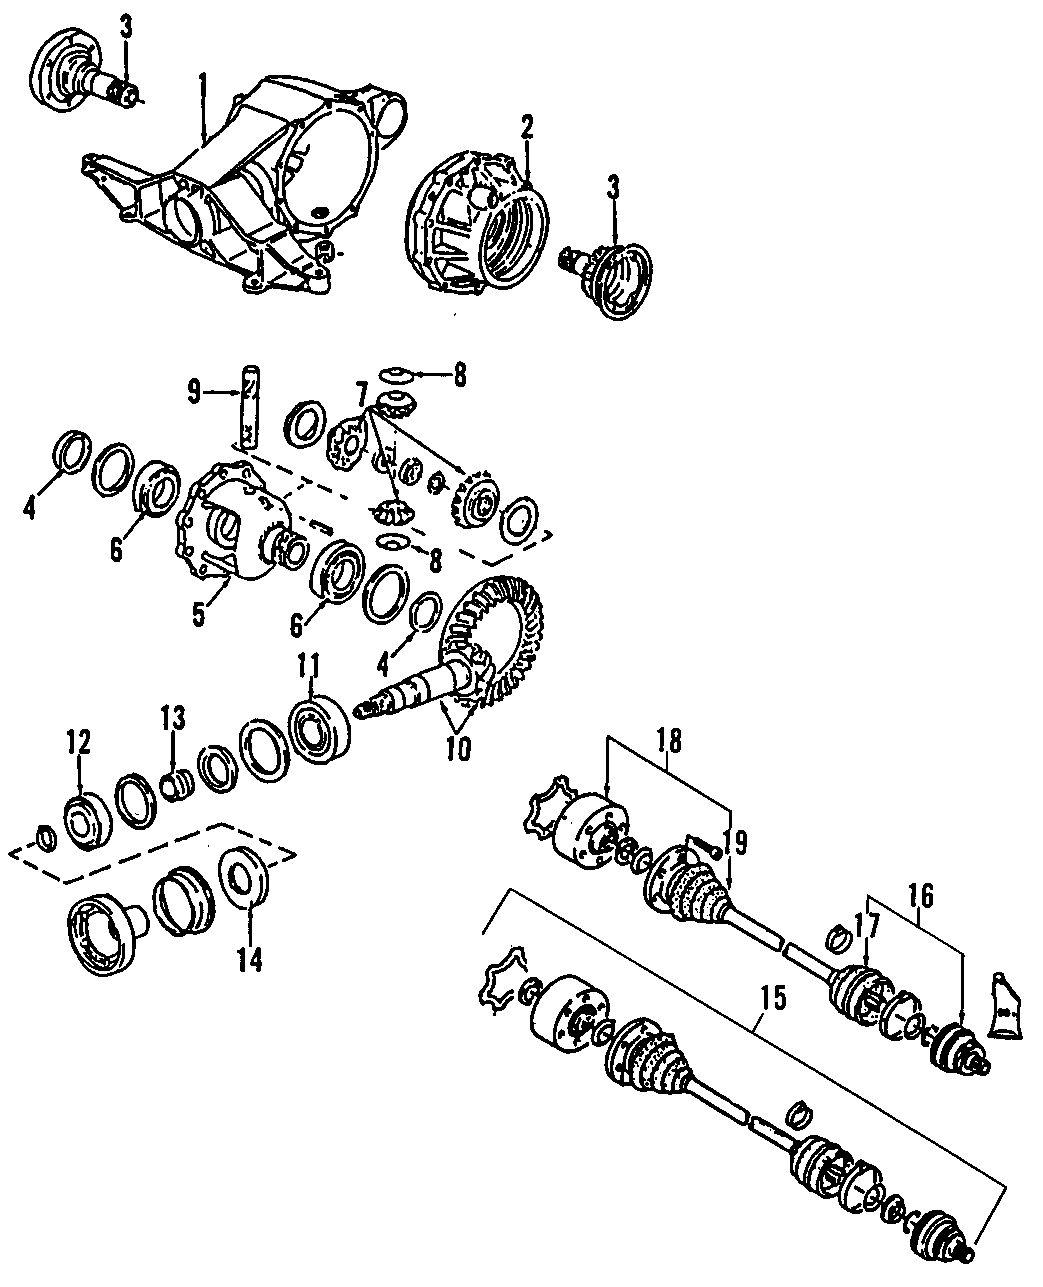 8DRIVE AXLES. REAR AXLE. AXLE SHAFTS & JOINTS. DIFFERENTIAL. PROPELLER SHAFT.https://images.simplepart.com/images/parts/motor/fullsize/F220090.png